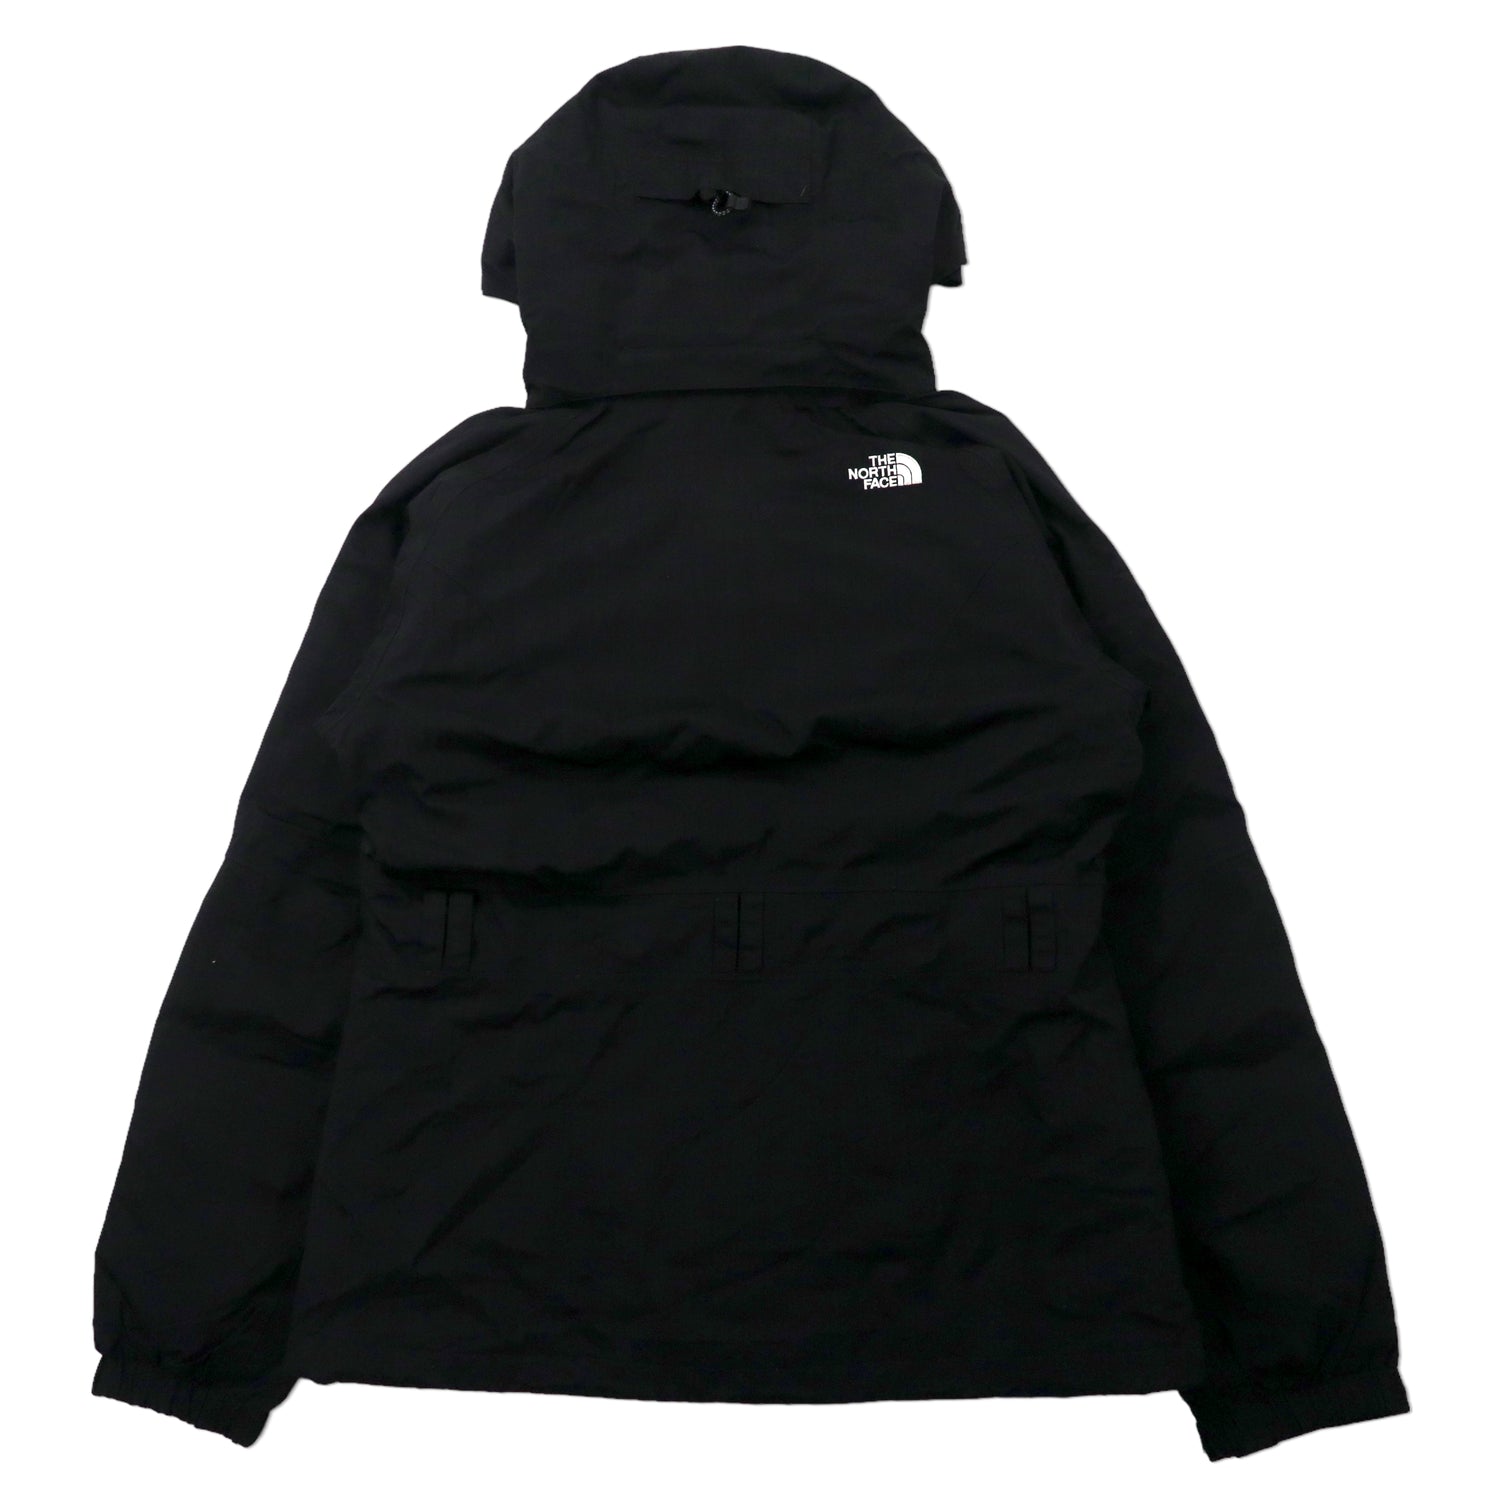 THE NORTH FACE Mountain HOODIE M Black Nylon 550 HYVENT 